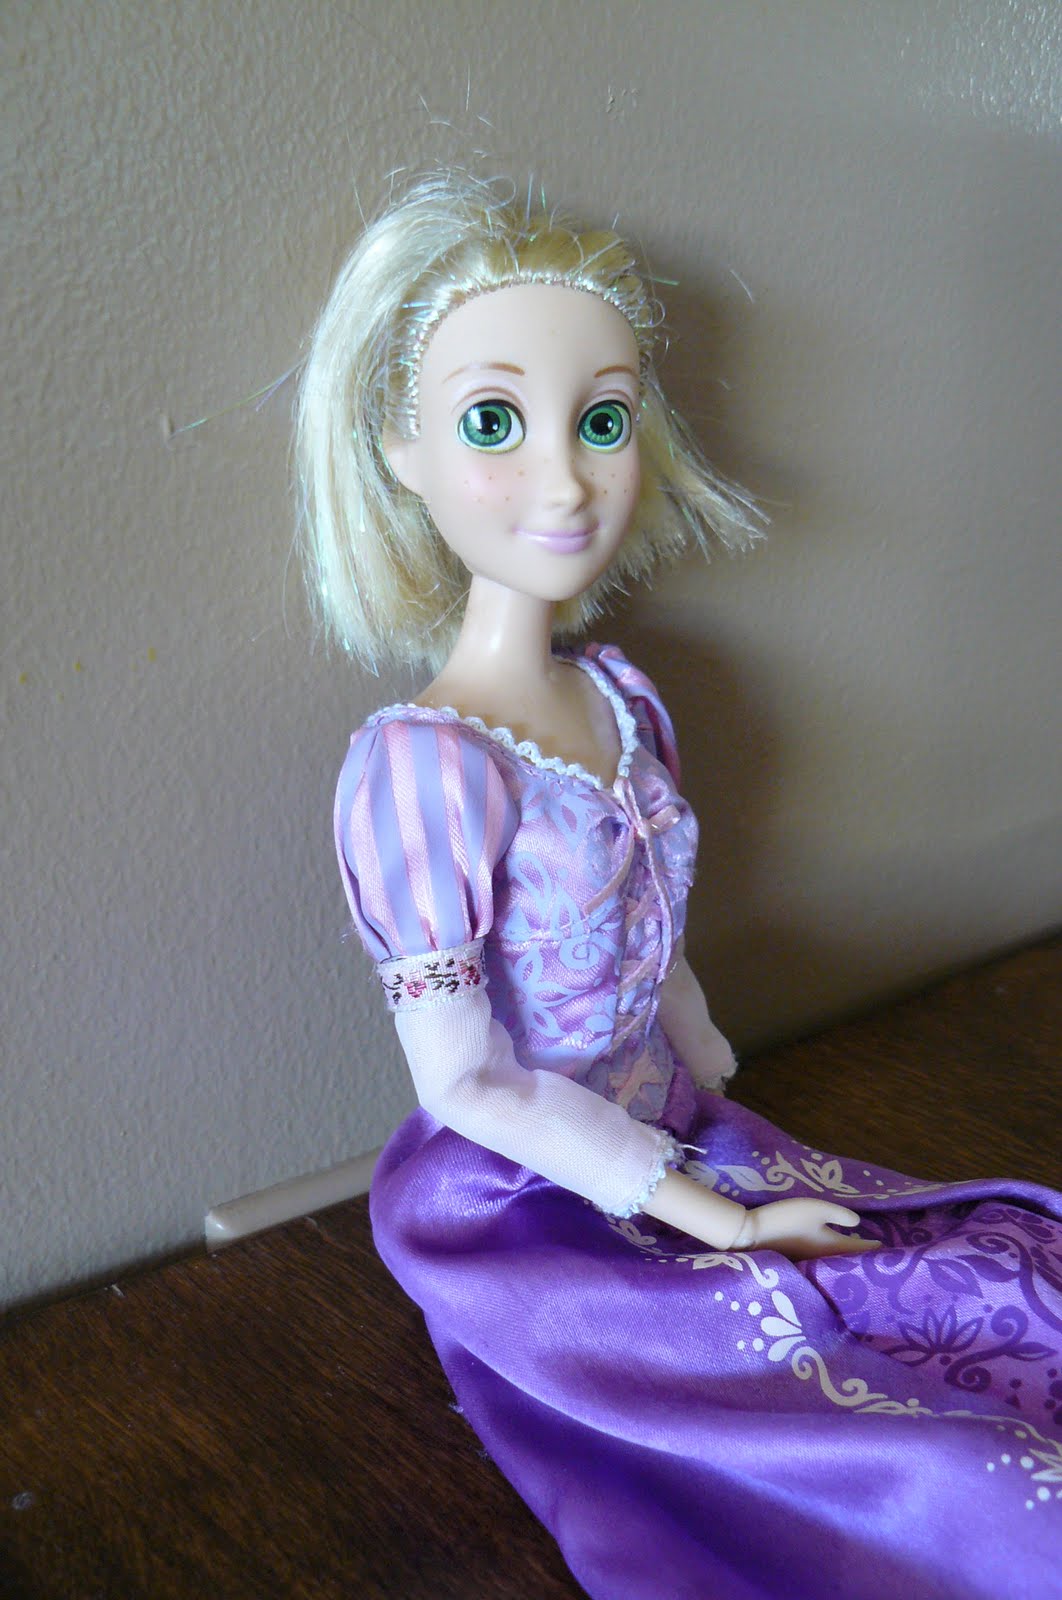 Small Fry & Co. : Rapunzel Rapunzel Let Down Your Hair (or not)-A real  mommy moment